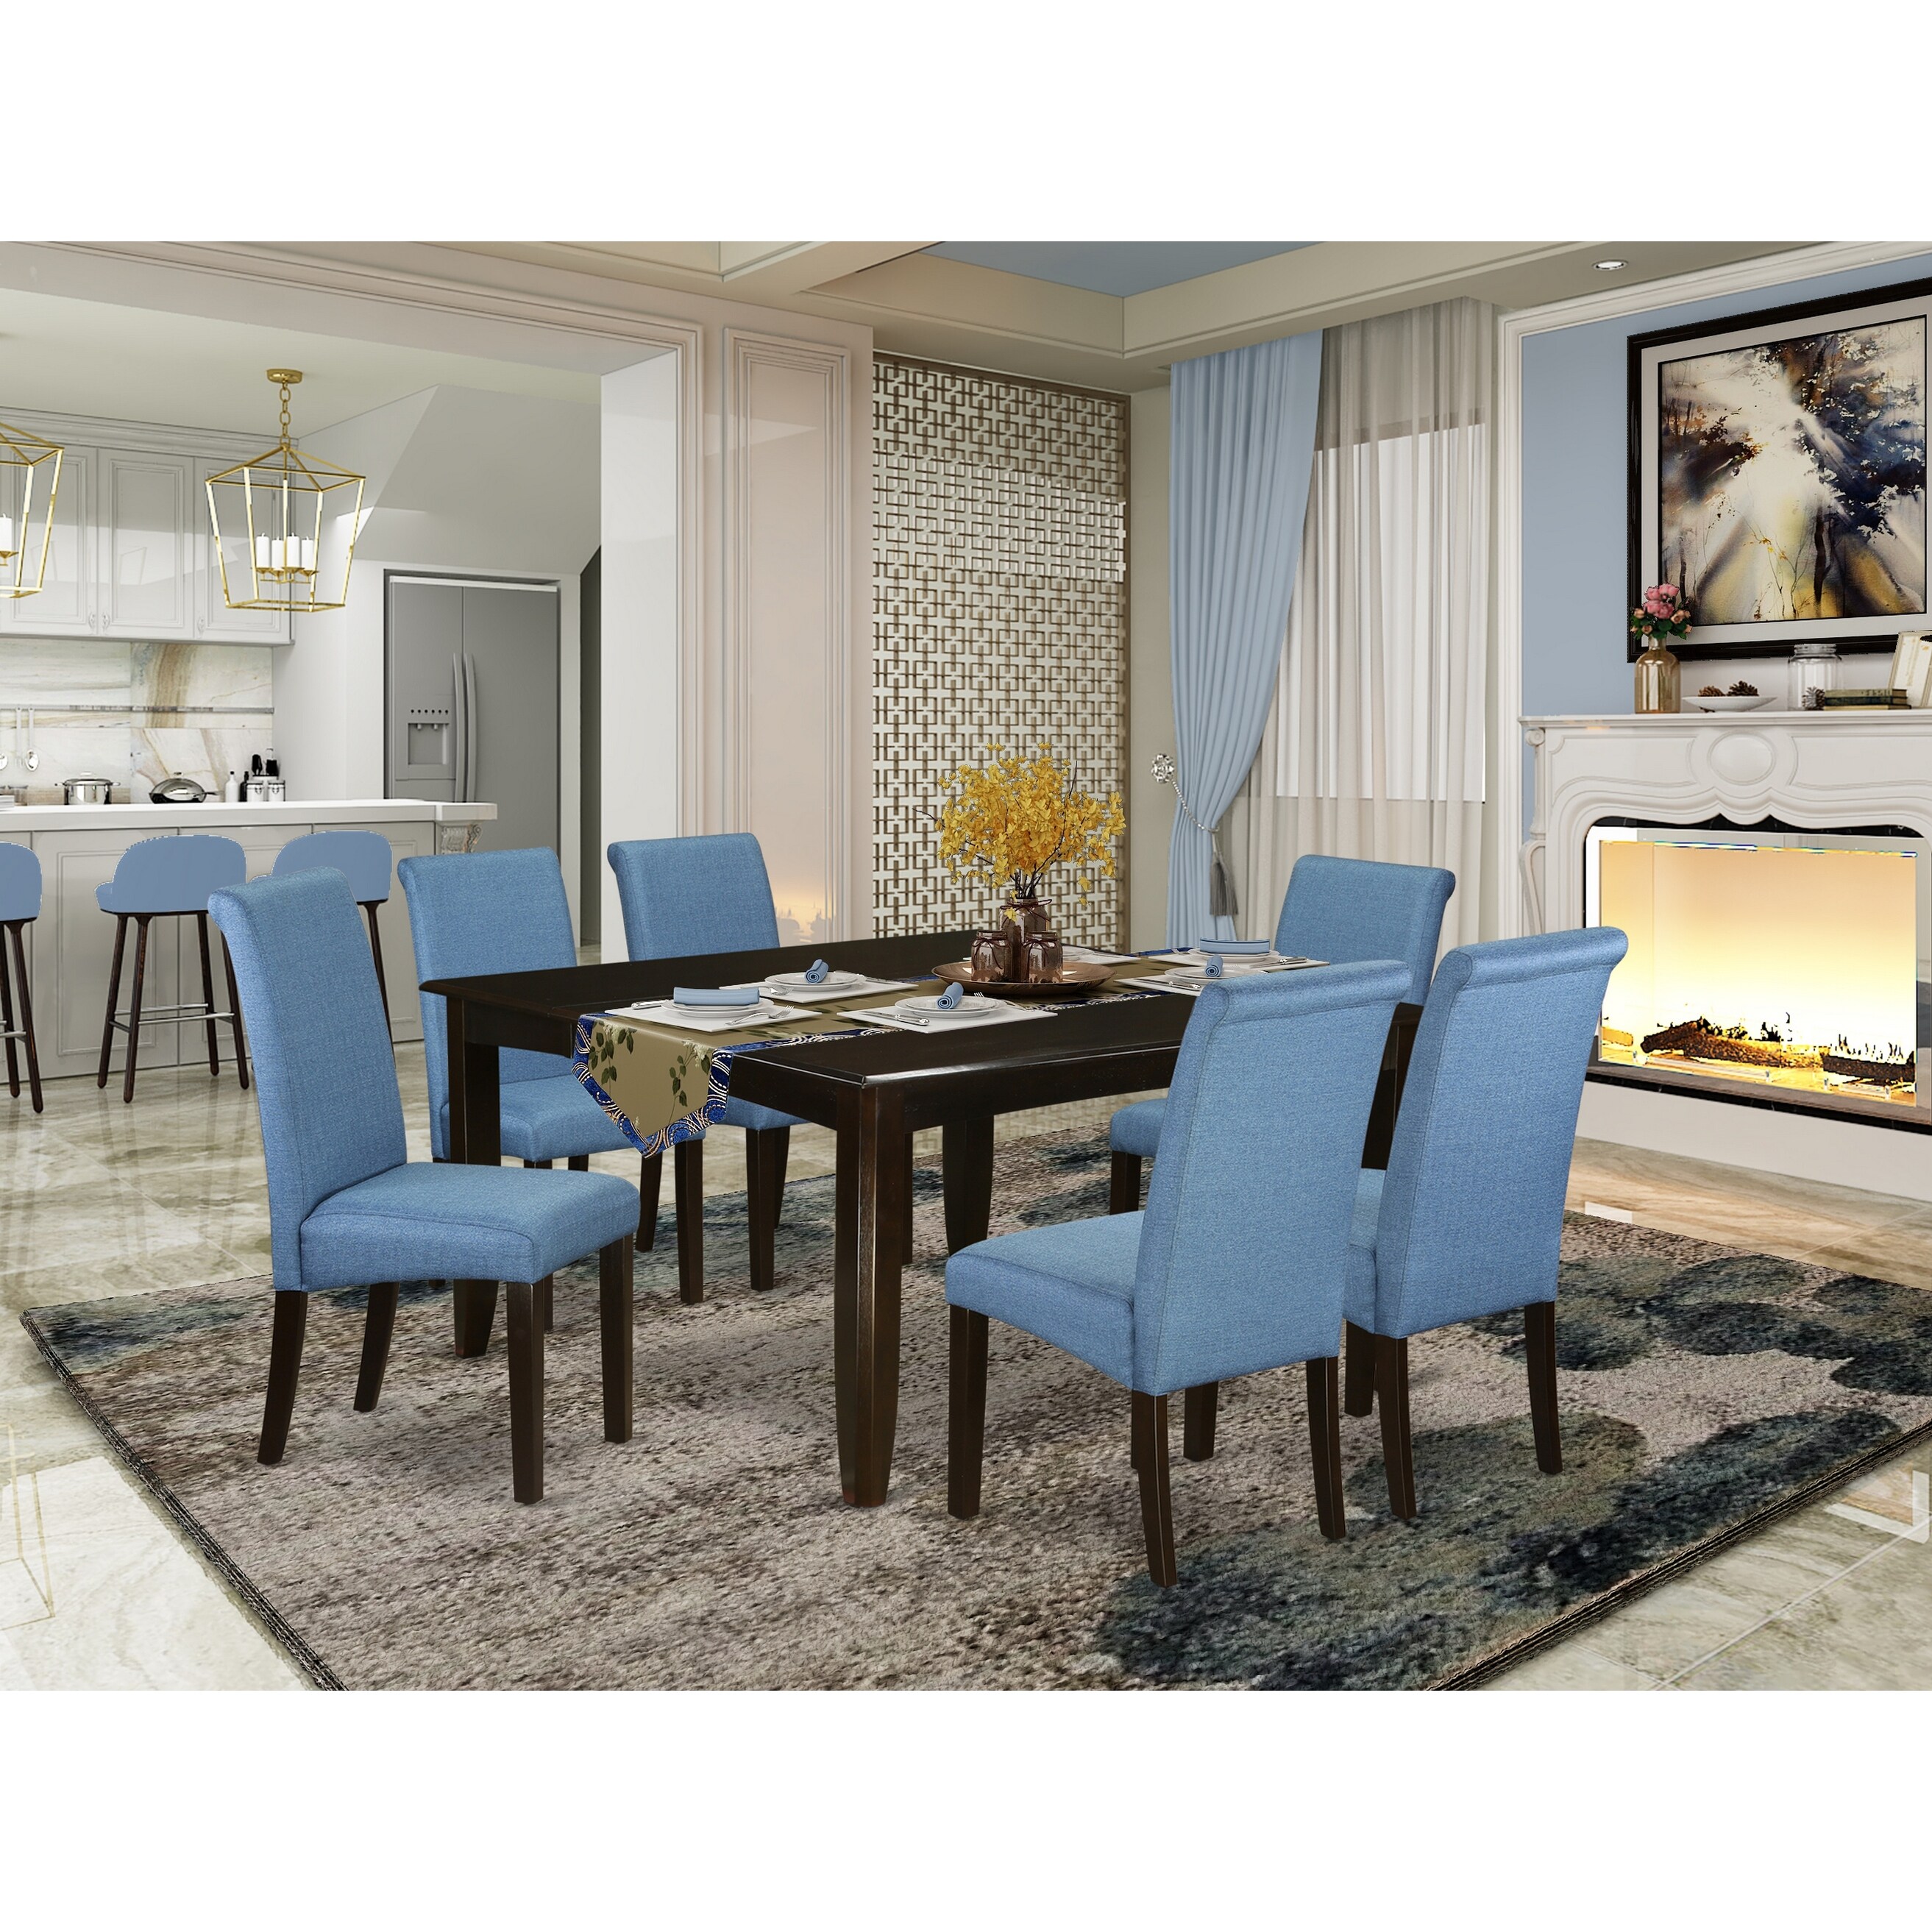 5pc Square Kitchen Table With Elegant Parson Chairs Number Of Chair Option Overstock 27864845 9 Piece Sets 8